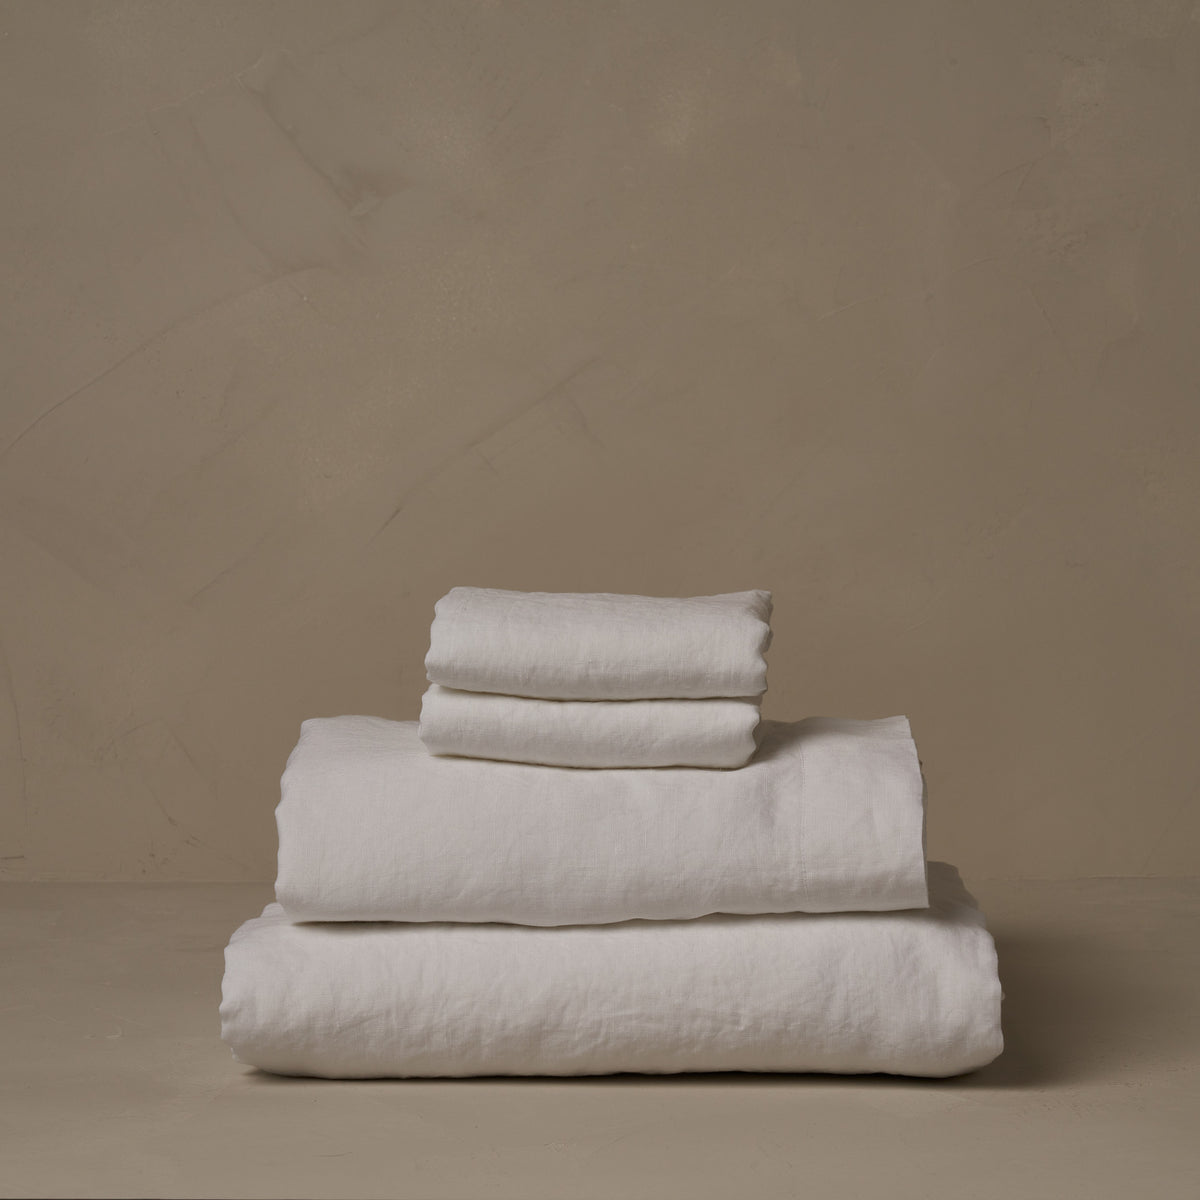 A stack of relaxed and breathable white Classic Linen sheets. Belgian flax, made in Italy. The set includes a fitted sheet, a flat sheet, and a pair of pillowcases. data-image-id=